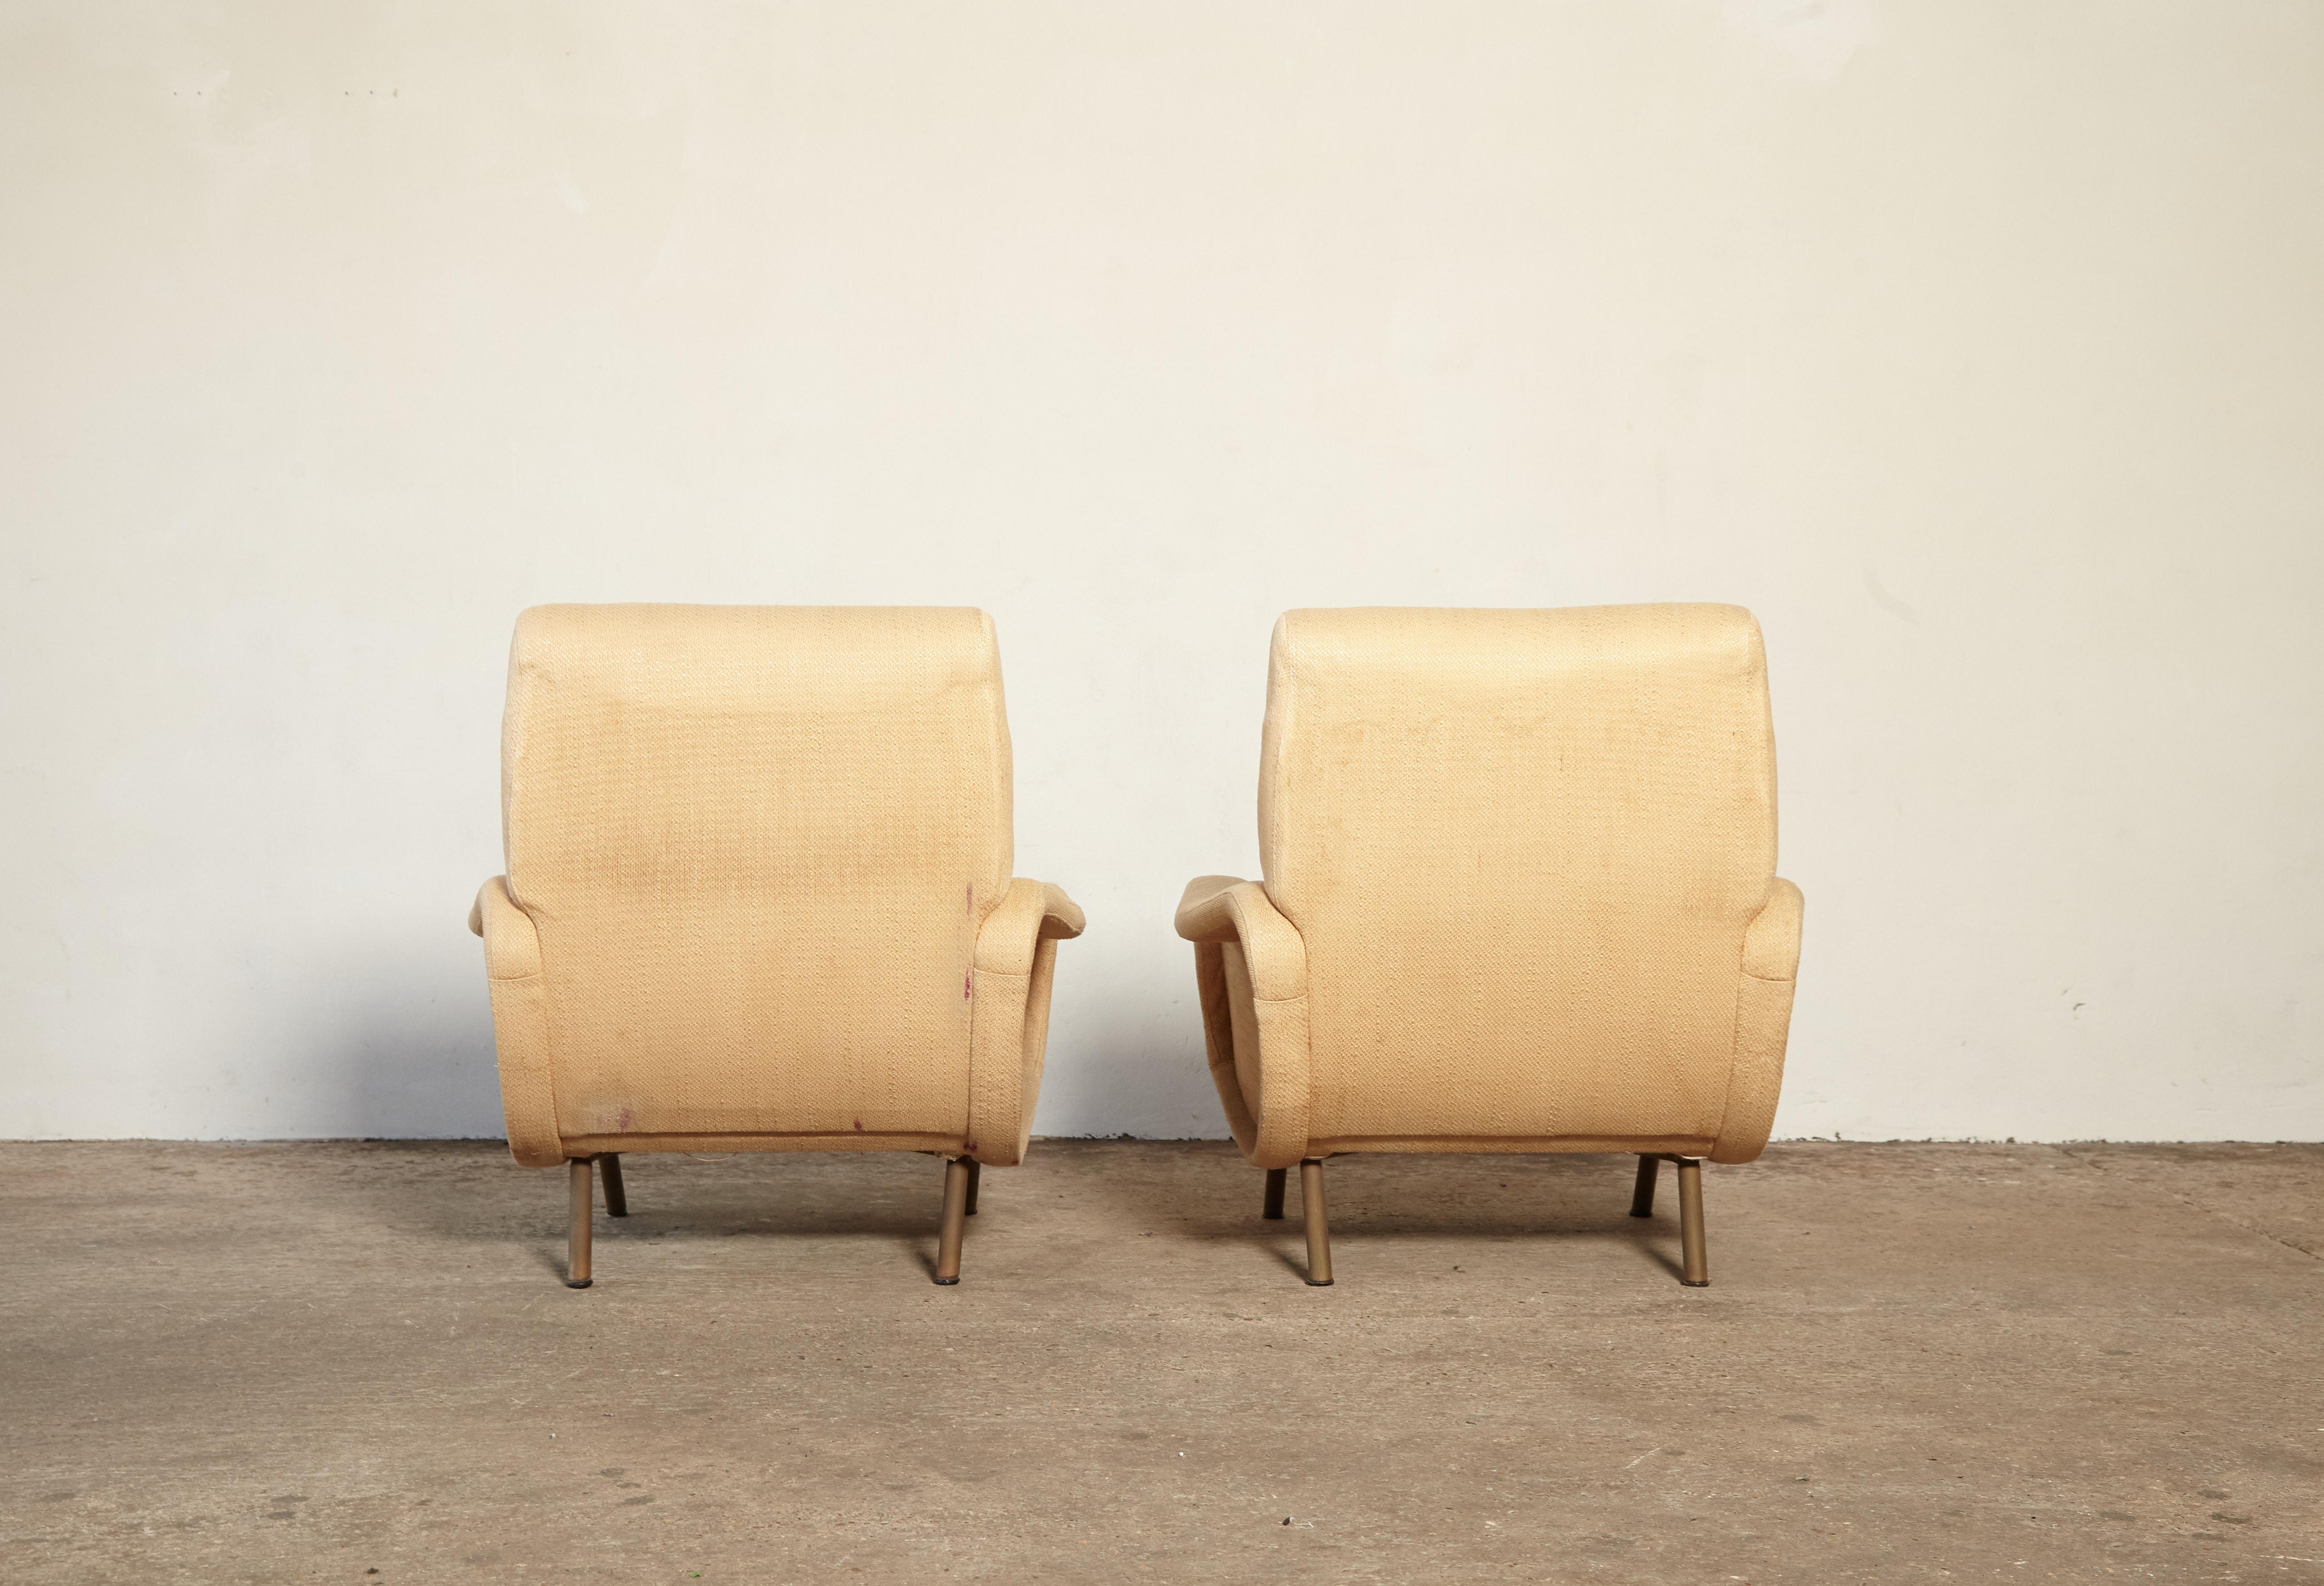 Brass Marco Zanuso Lady Chairs, Arflex, Italy, 1950s, Includes Reupholstery in COM